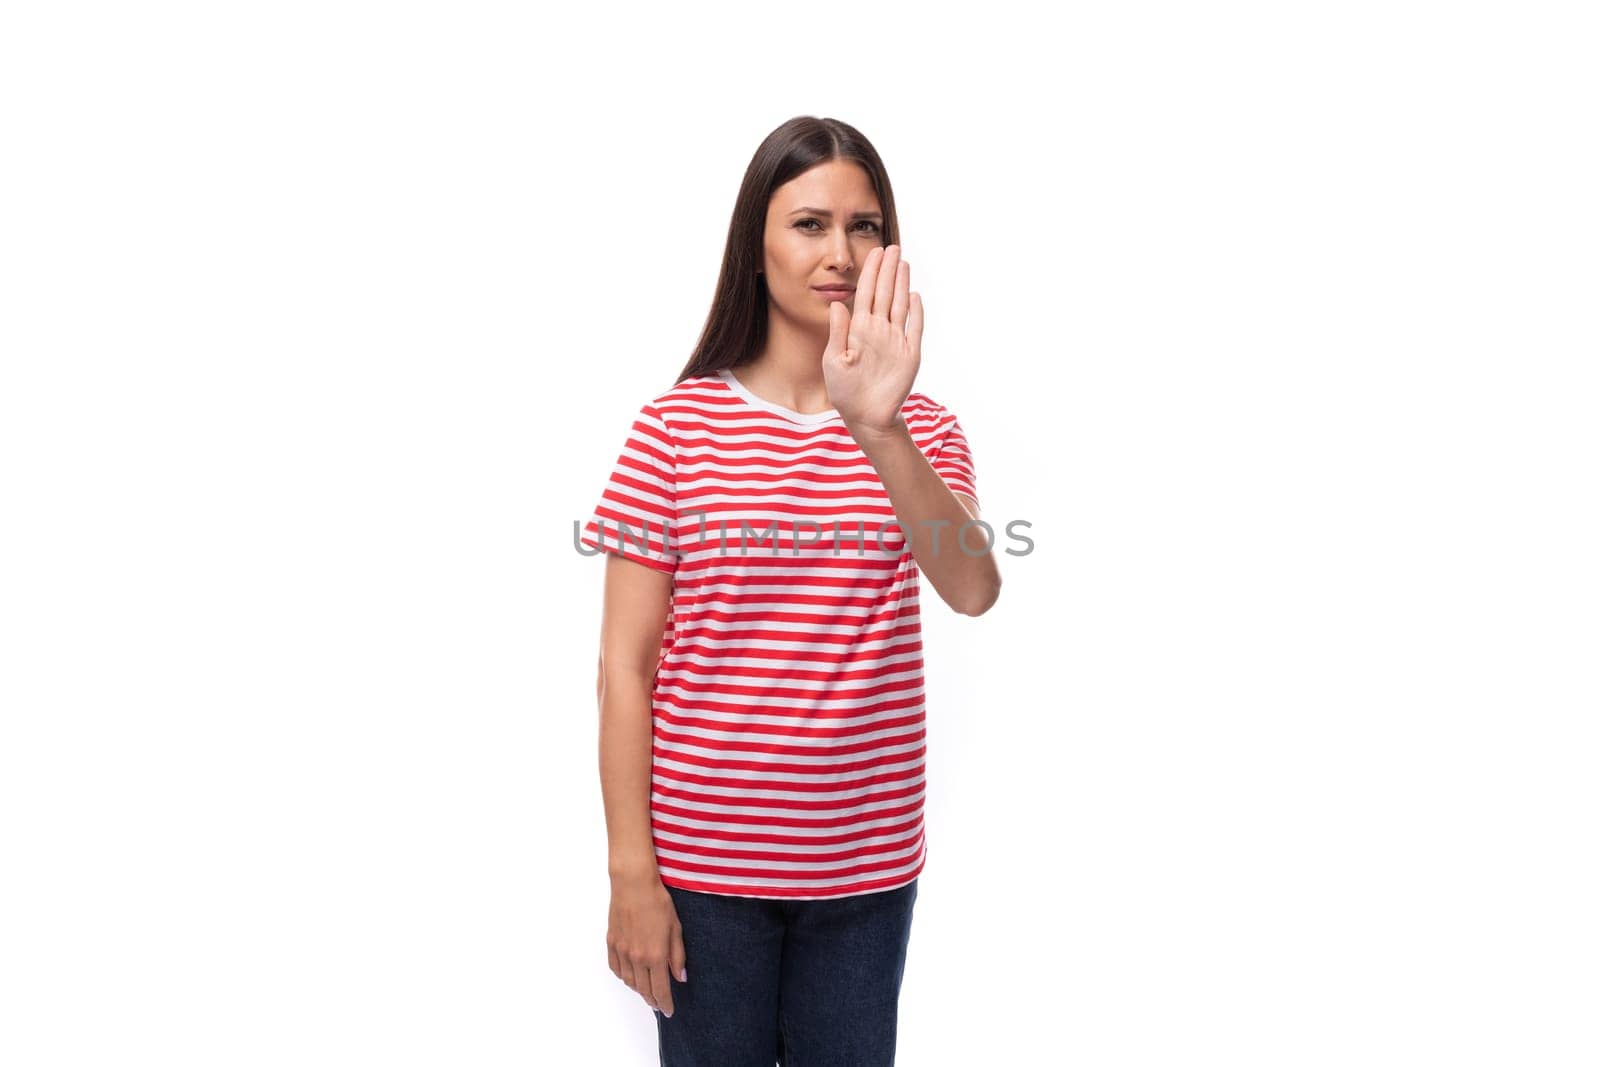 35 year old european lady in a red striped t-shirt shows a gesture of refusal and disagreement by TRMK